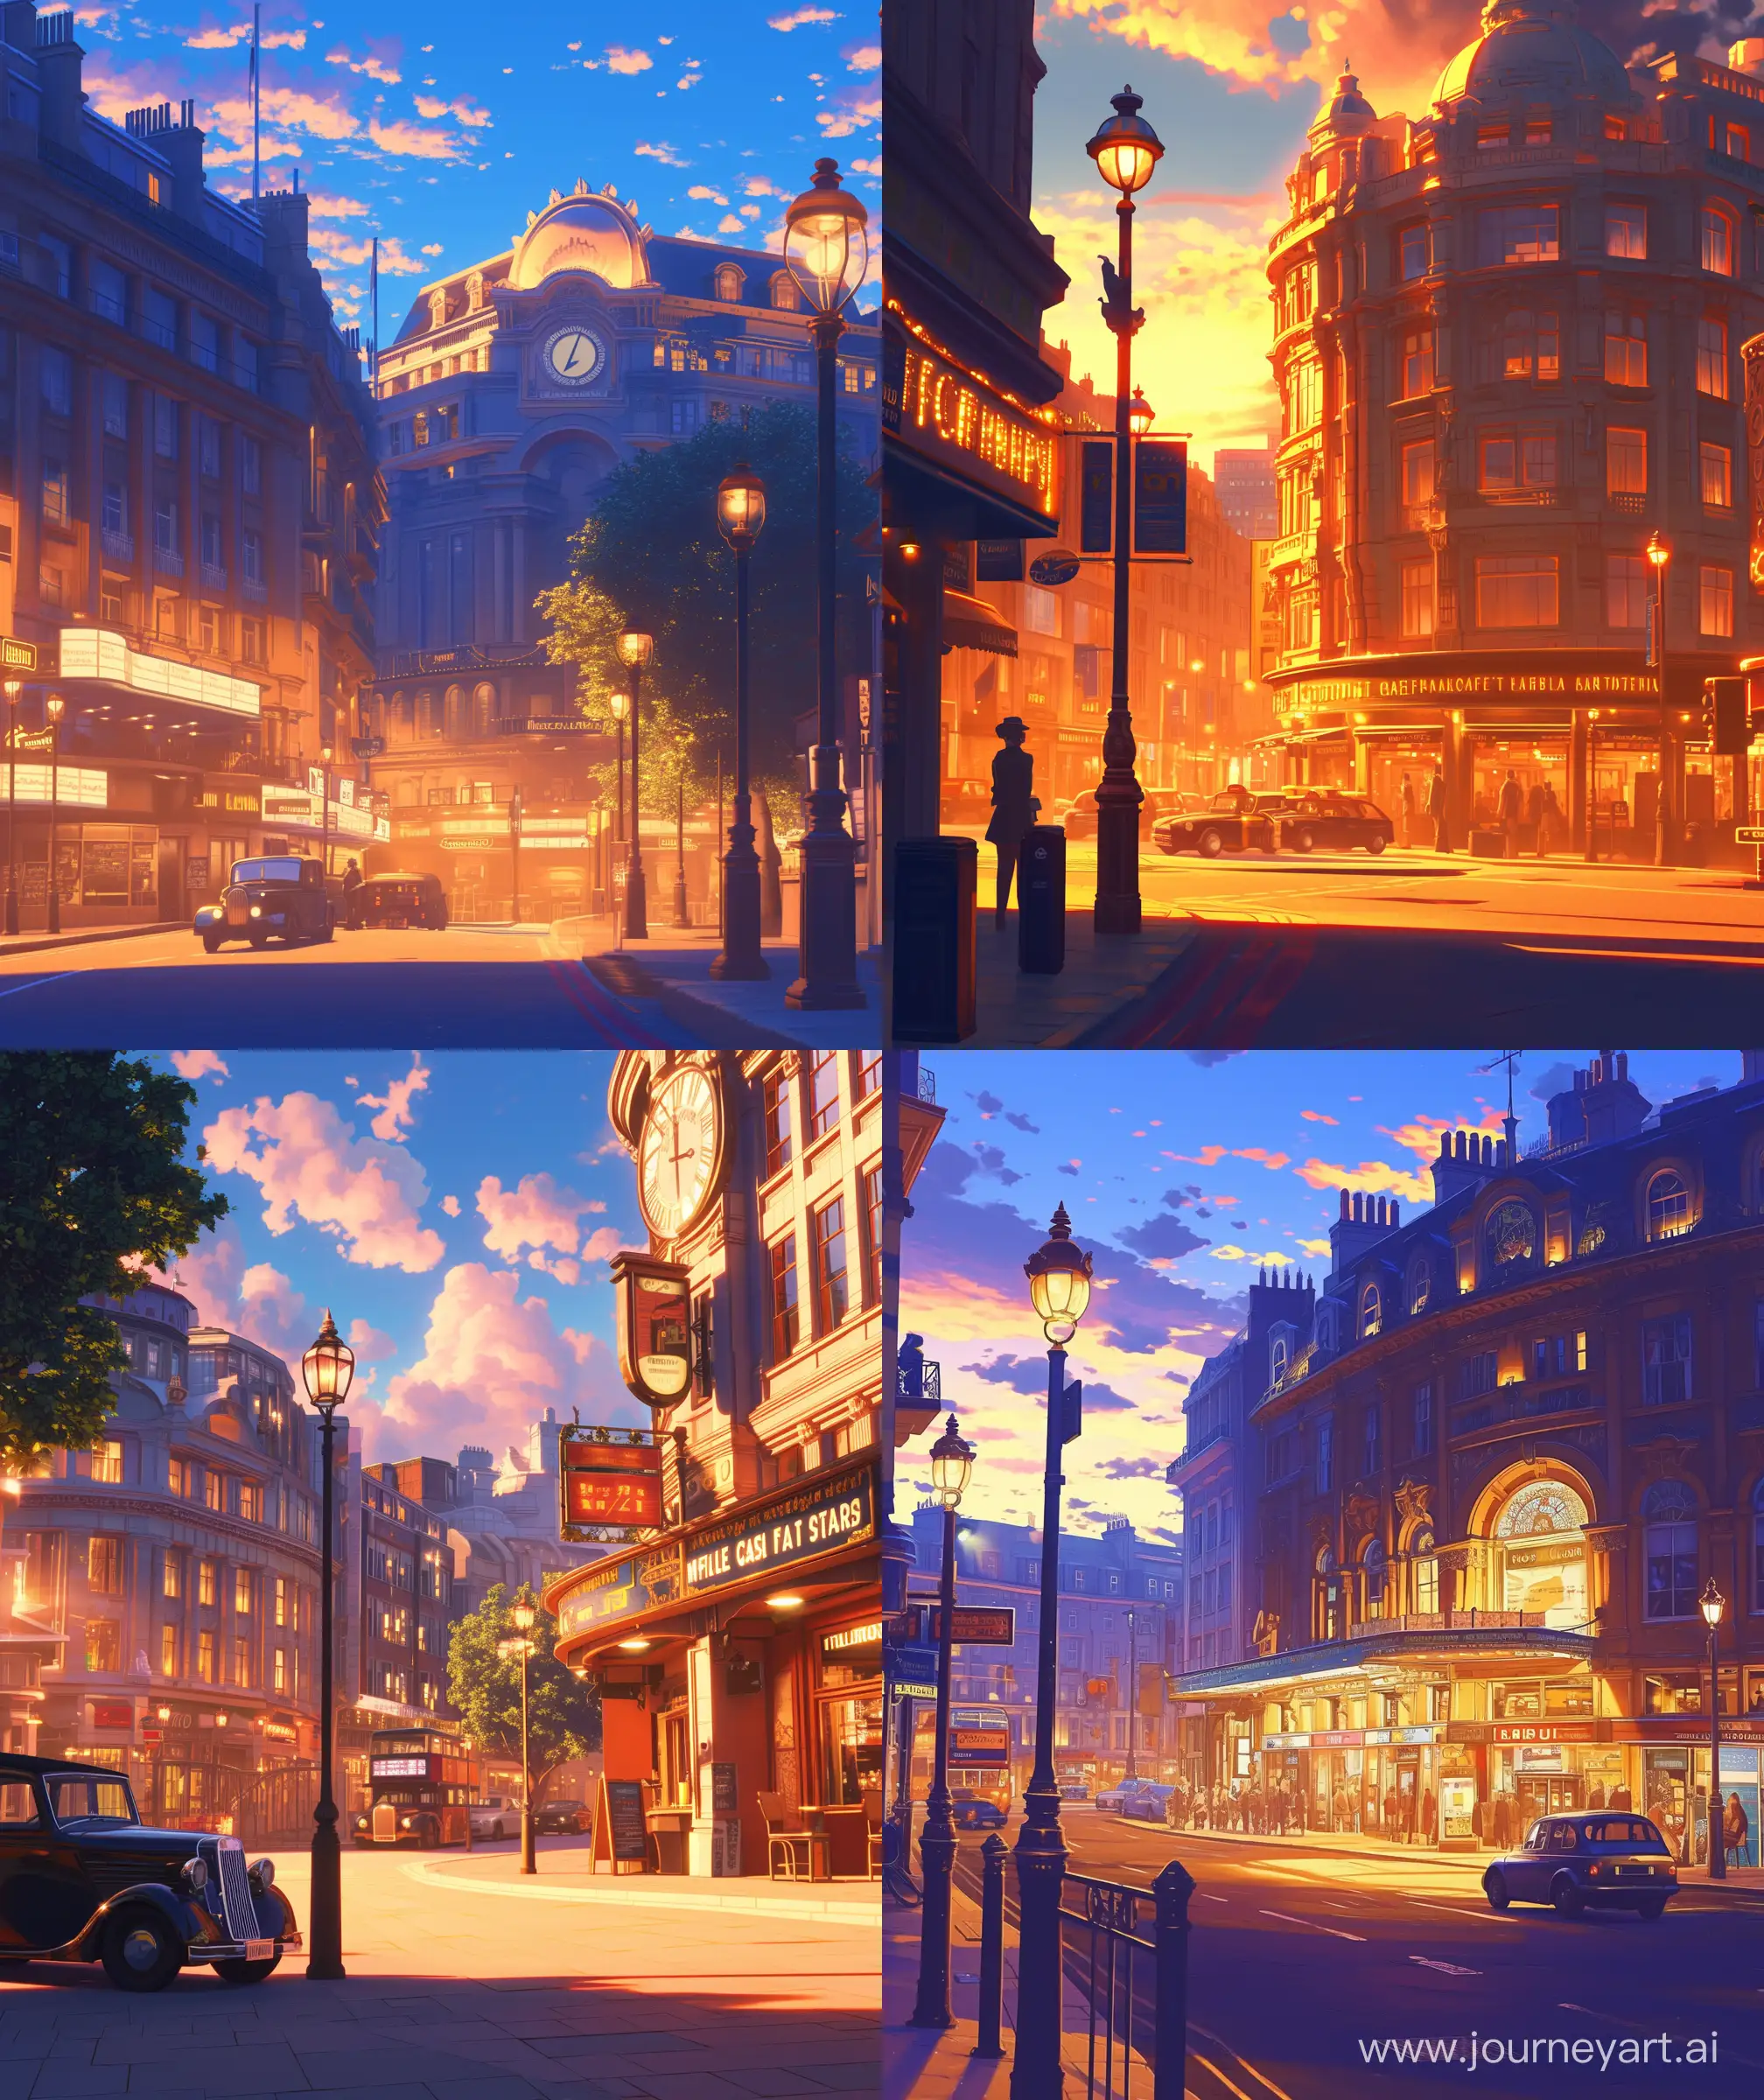 Bustling-City-Street-at-Dusk-Retro-Anime-Style-with-London-Cinema-Hall-and-Glowing-Cafe-Signboard